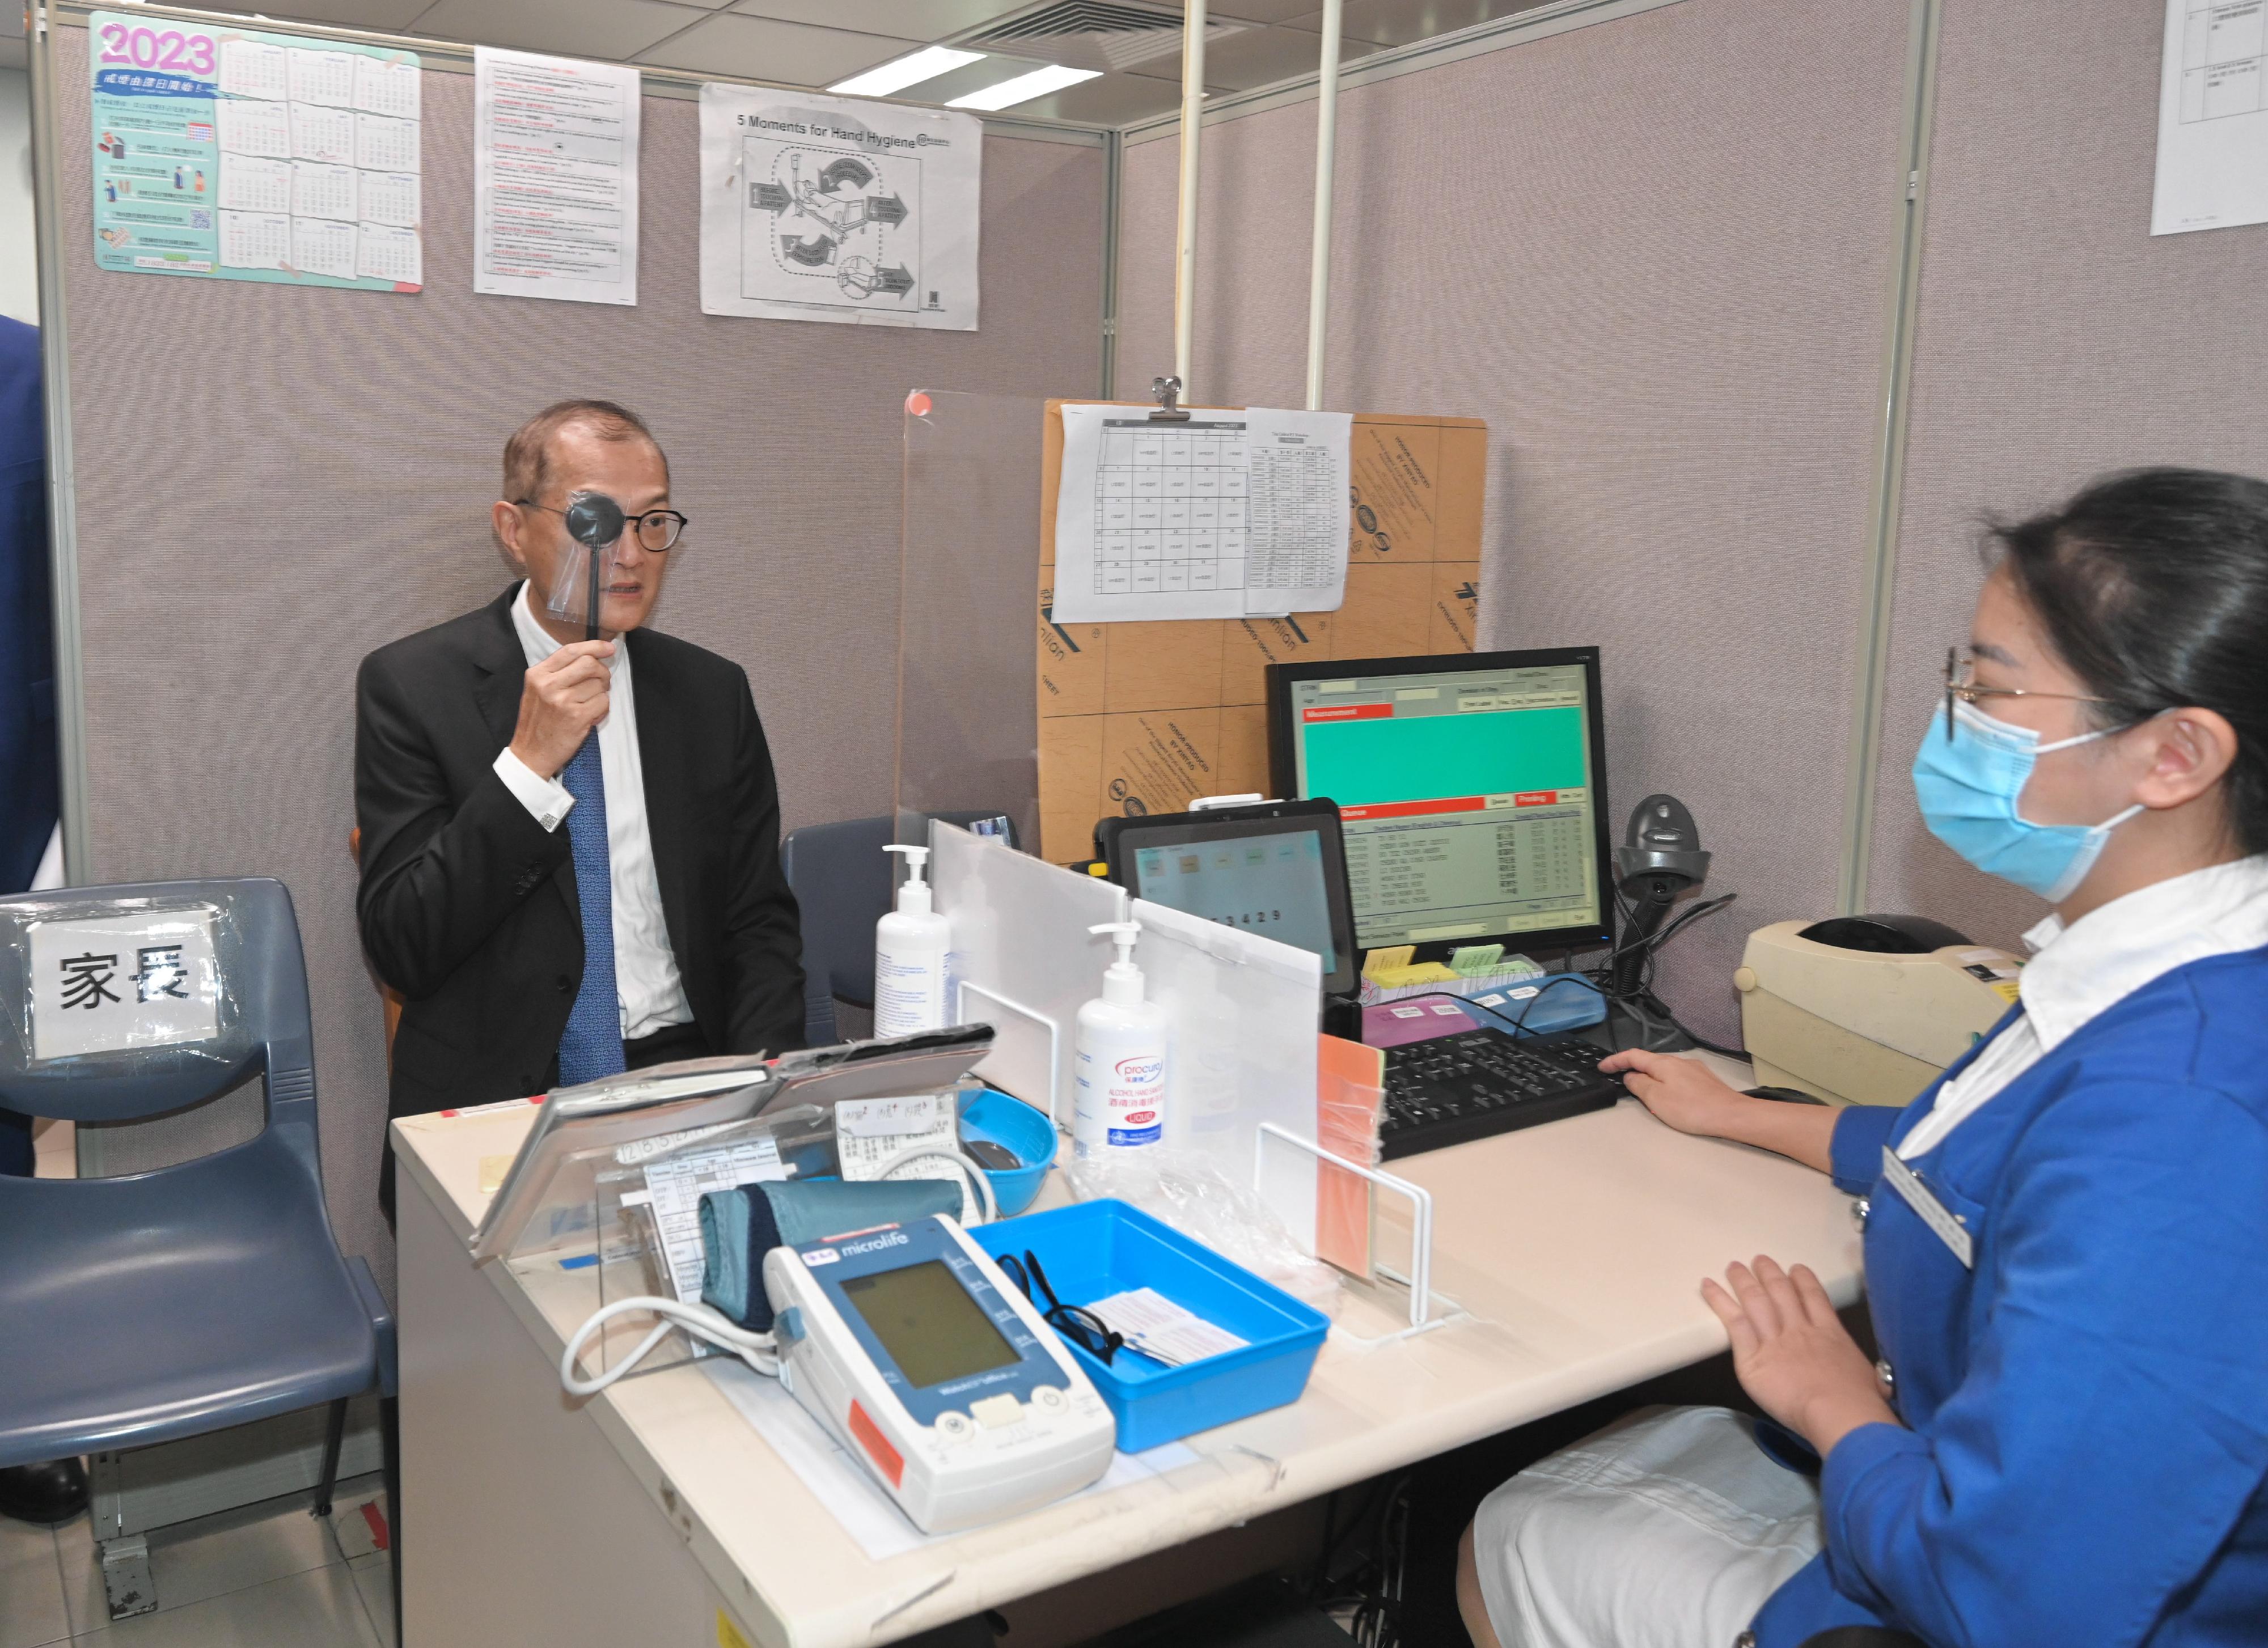 The Secretary for Health, Professor Lo Chung-mau, visited the Lam Tin Student Health Service Centre under the Department of Health this afternoon (August 15). Photo shows Professor Lo (left) taking part in an eye test at the Centre.
